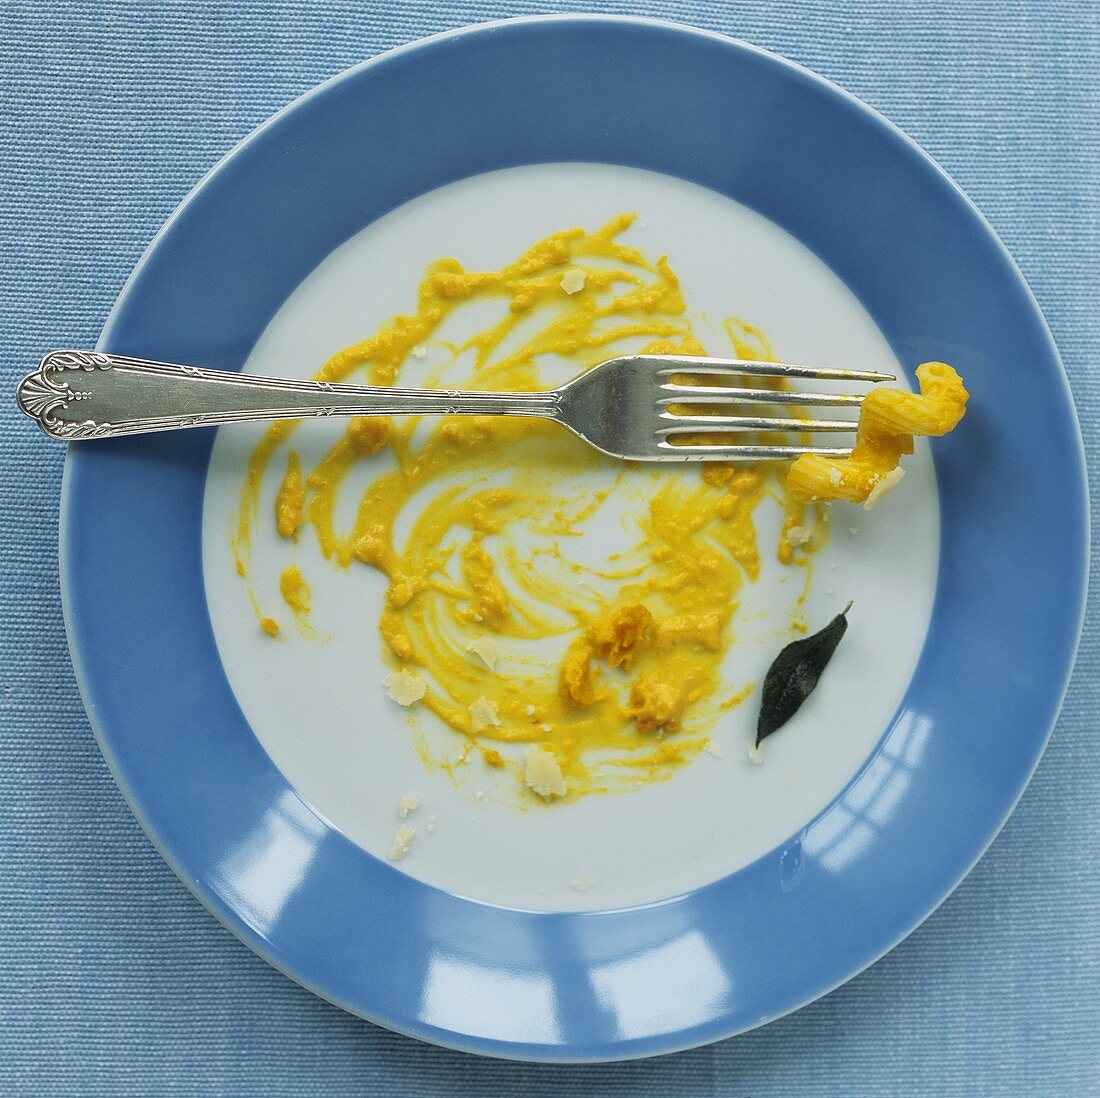 Remains of pasta with pumpkin sauce on a plate with fork